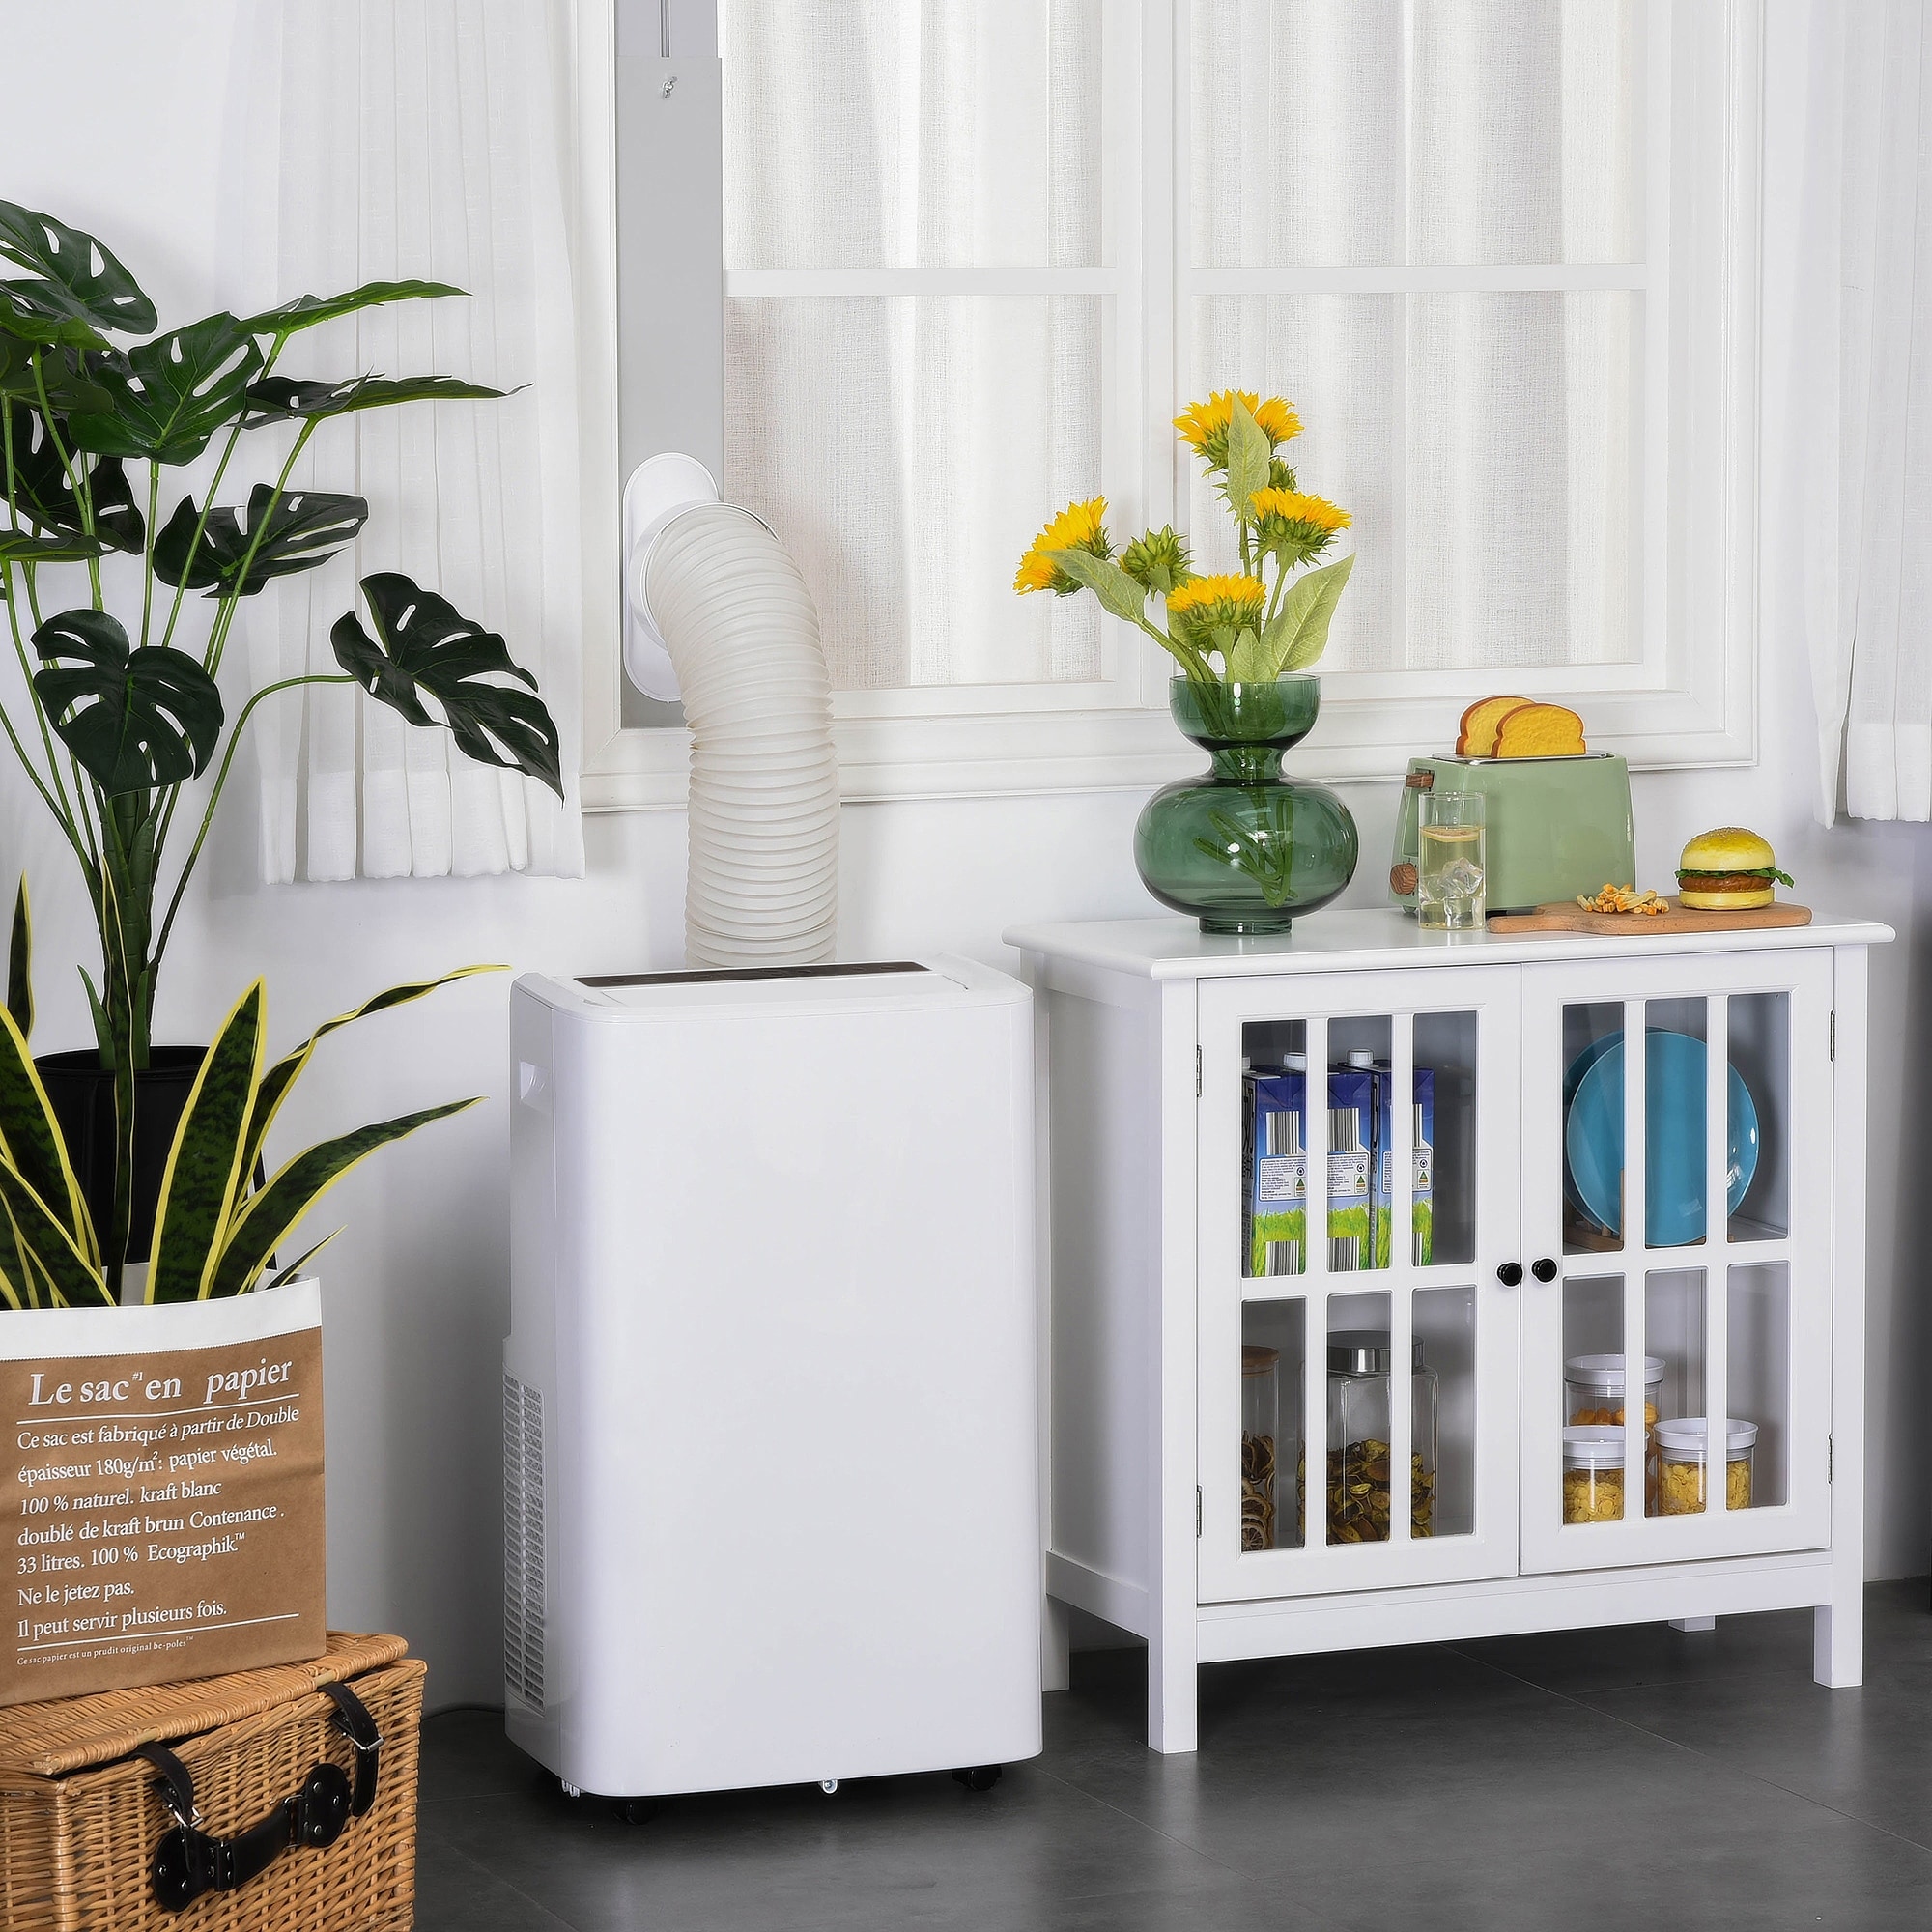 https://ak1.ostkcdn.com/images/products/is/images/direct/25648babf17feba7556416dab70eda311e9dca7c/HOMCOM-12000-BTU-Portable-Air-Conditioner-with-Cooling%2C-Dehumidifying%2C-Ventilating-Function%2C-White.jpg